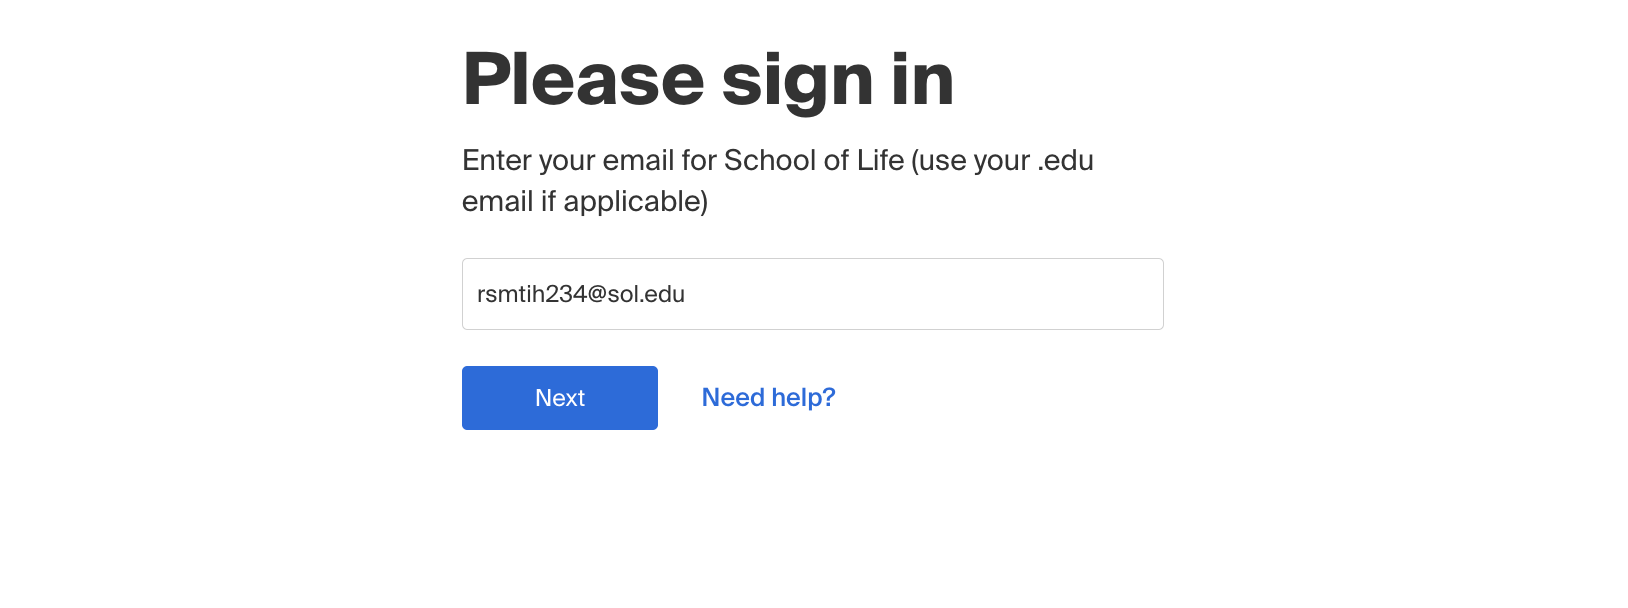 Sign_In_With_Email_Image.png